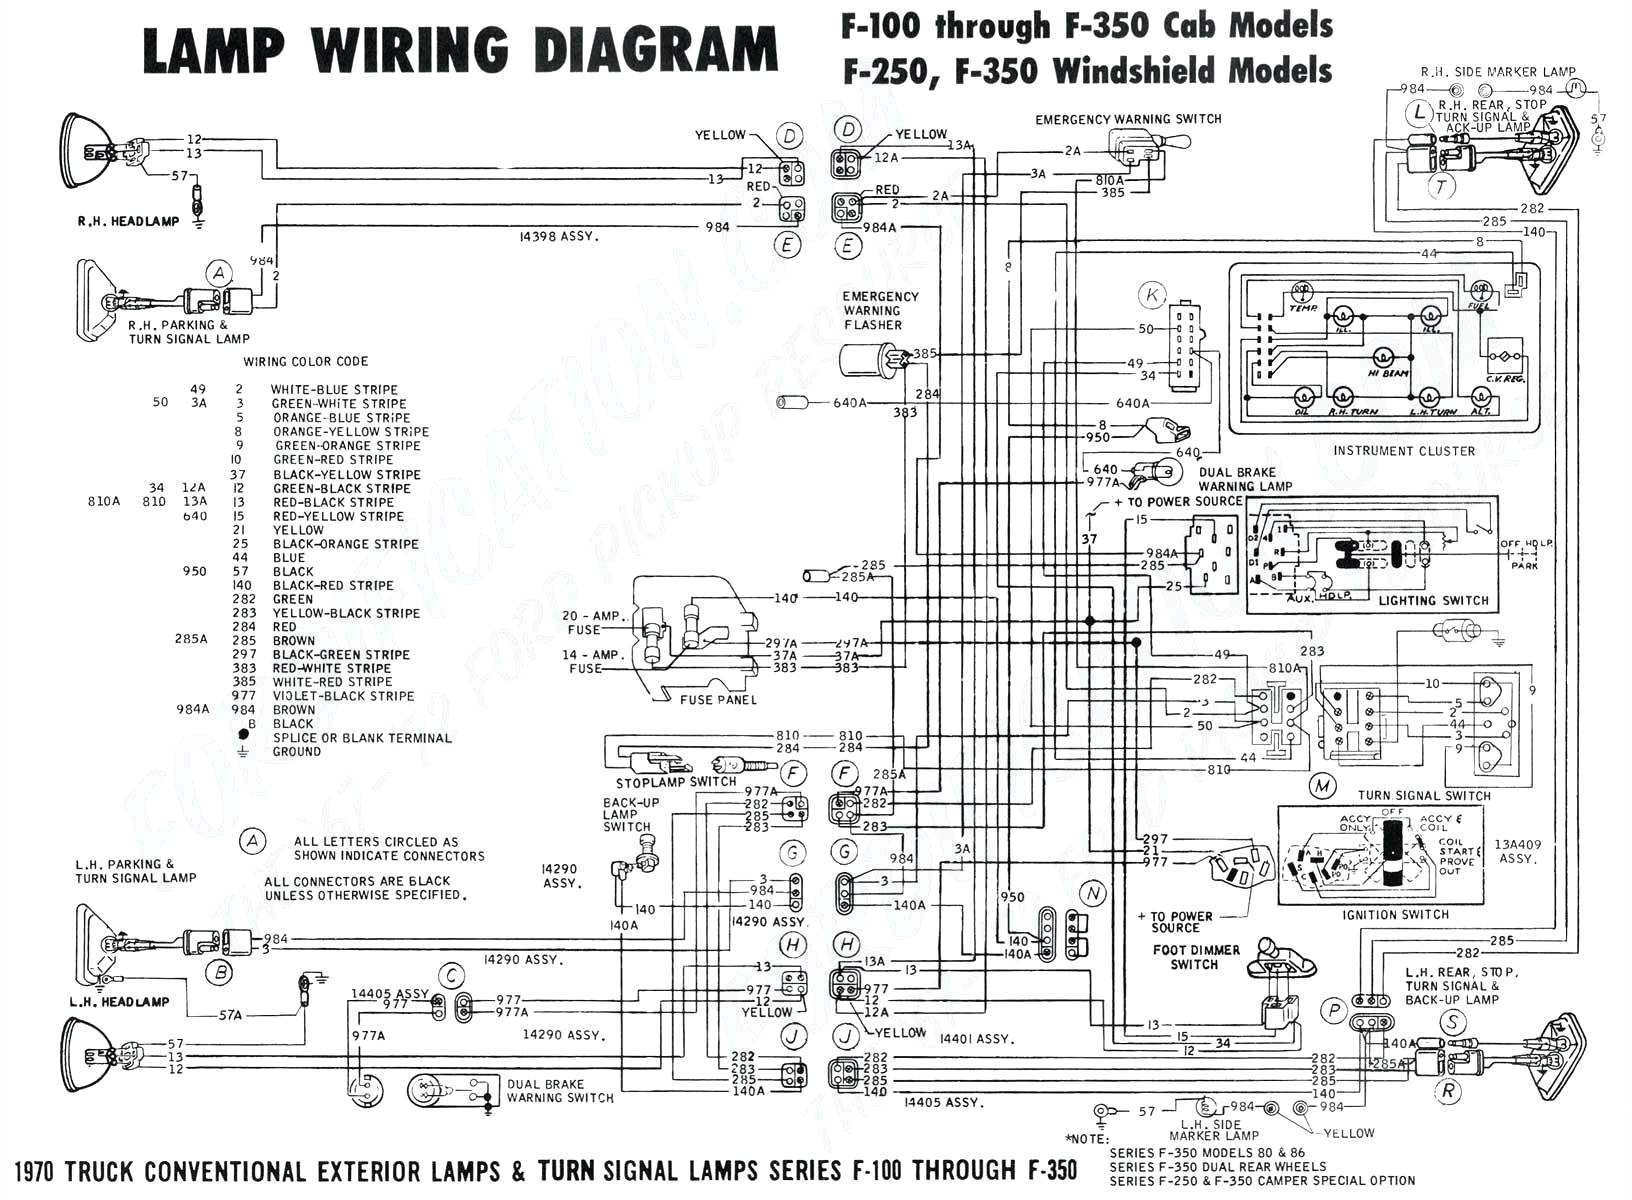 2005 ford f 150 stereo wiring harness diagram wiring diagram details about 7 pin towbar wiring kit vauxhall astra h estate 0410